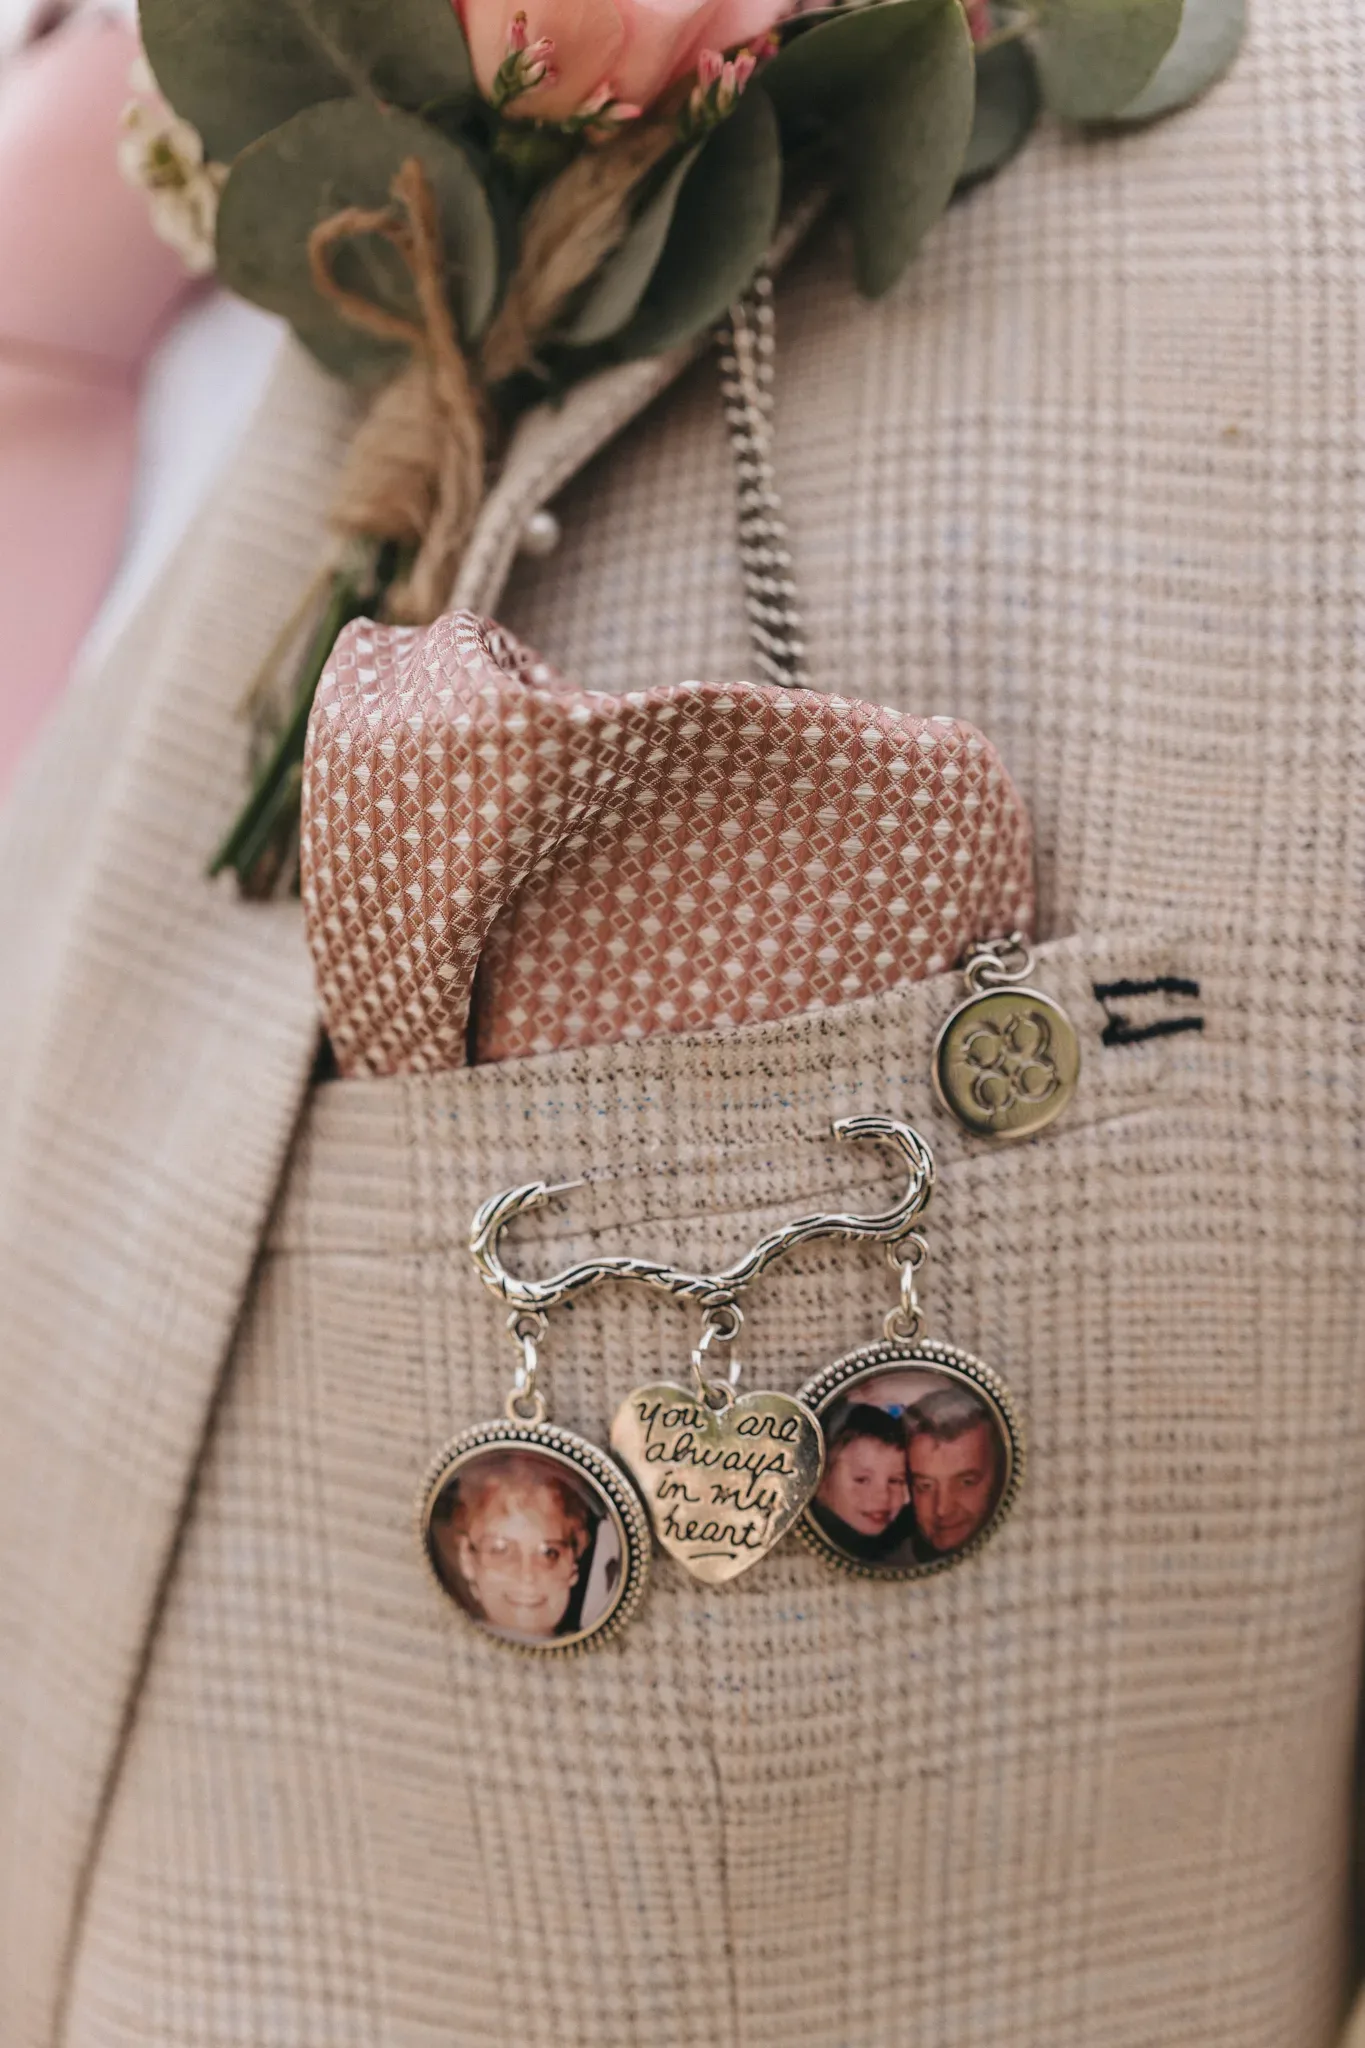 A close-up of a lapel pin on a tweed jacket featuring two photo charms and an engraved pendant that reads "you are always in my heart," beside a rose boutonniere. the photos in the charms depict smiling faces.